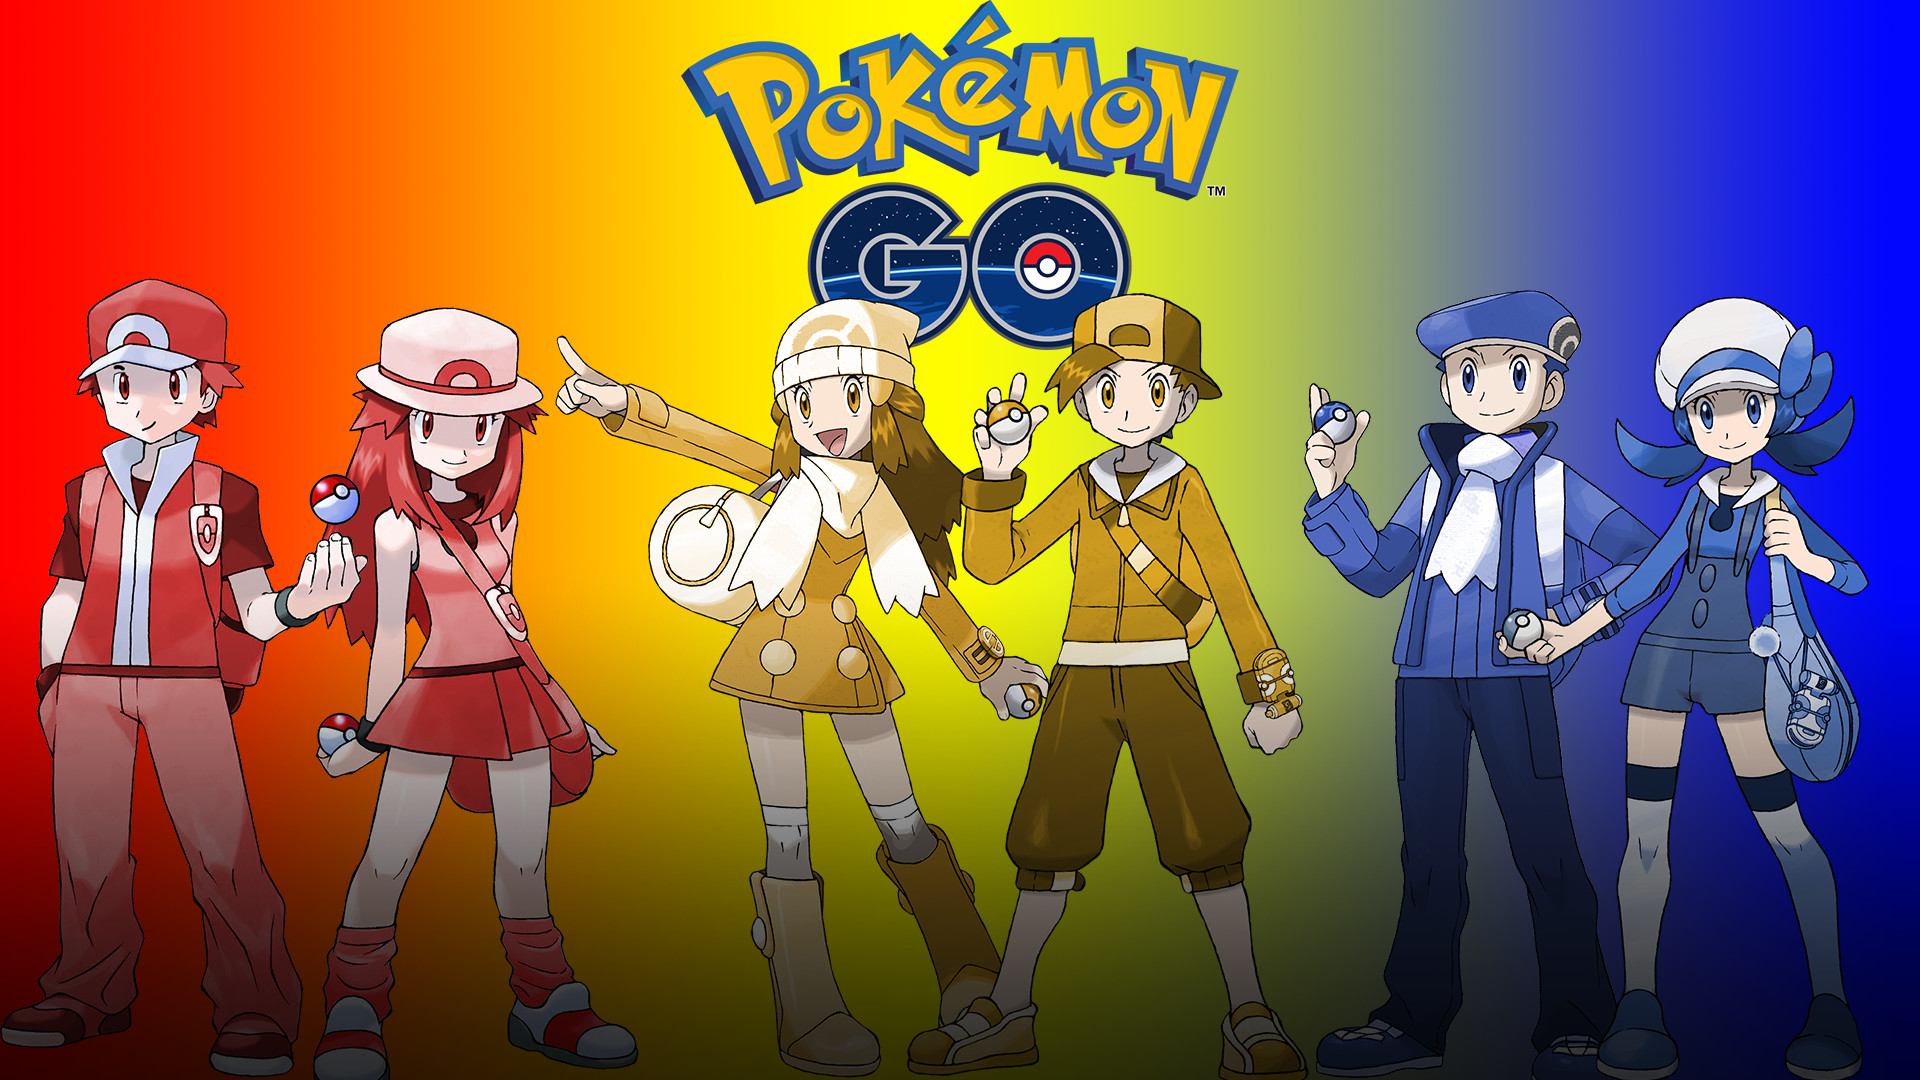 1920x1080 I Made A Desktop Wallpaper For Pokemon Go! So Here's A Little Present For  Your Computer As We Venture Towards July ...